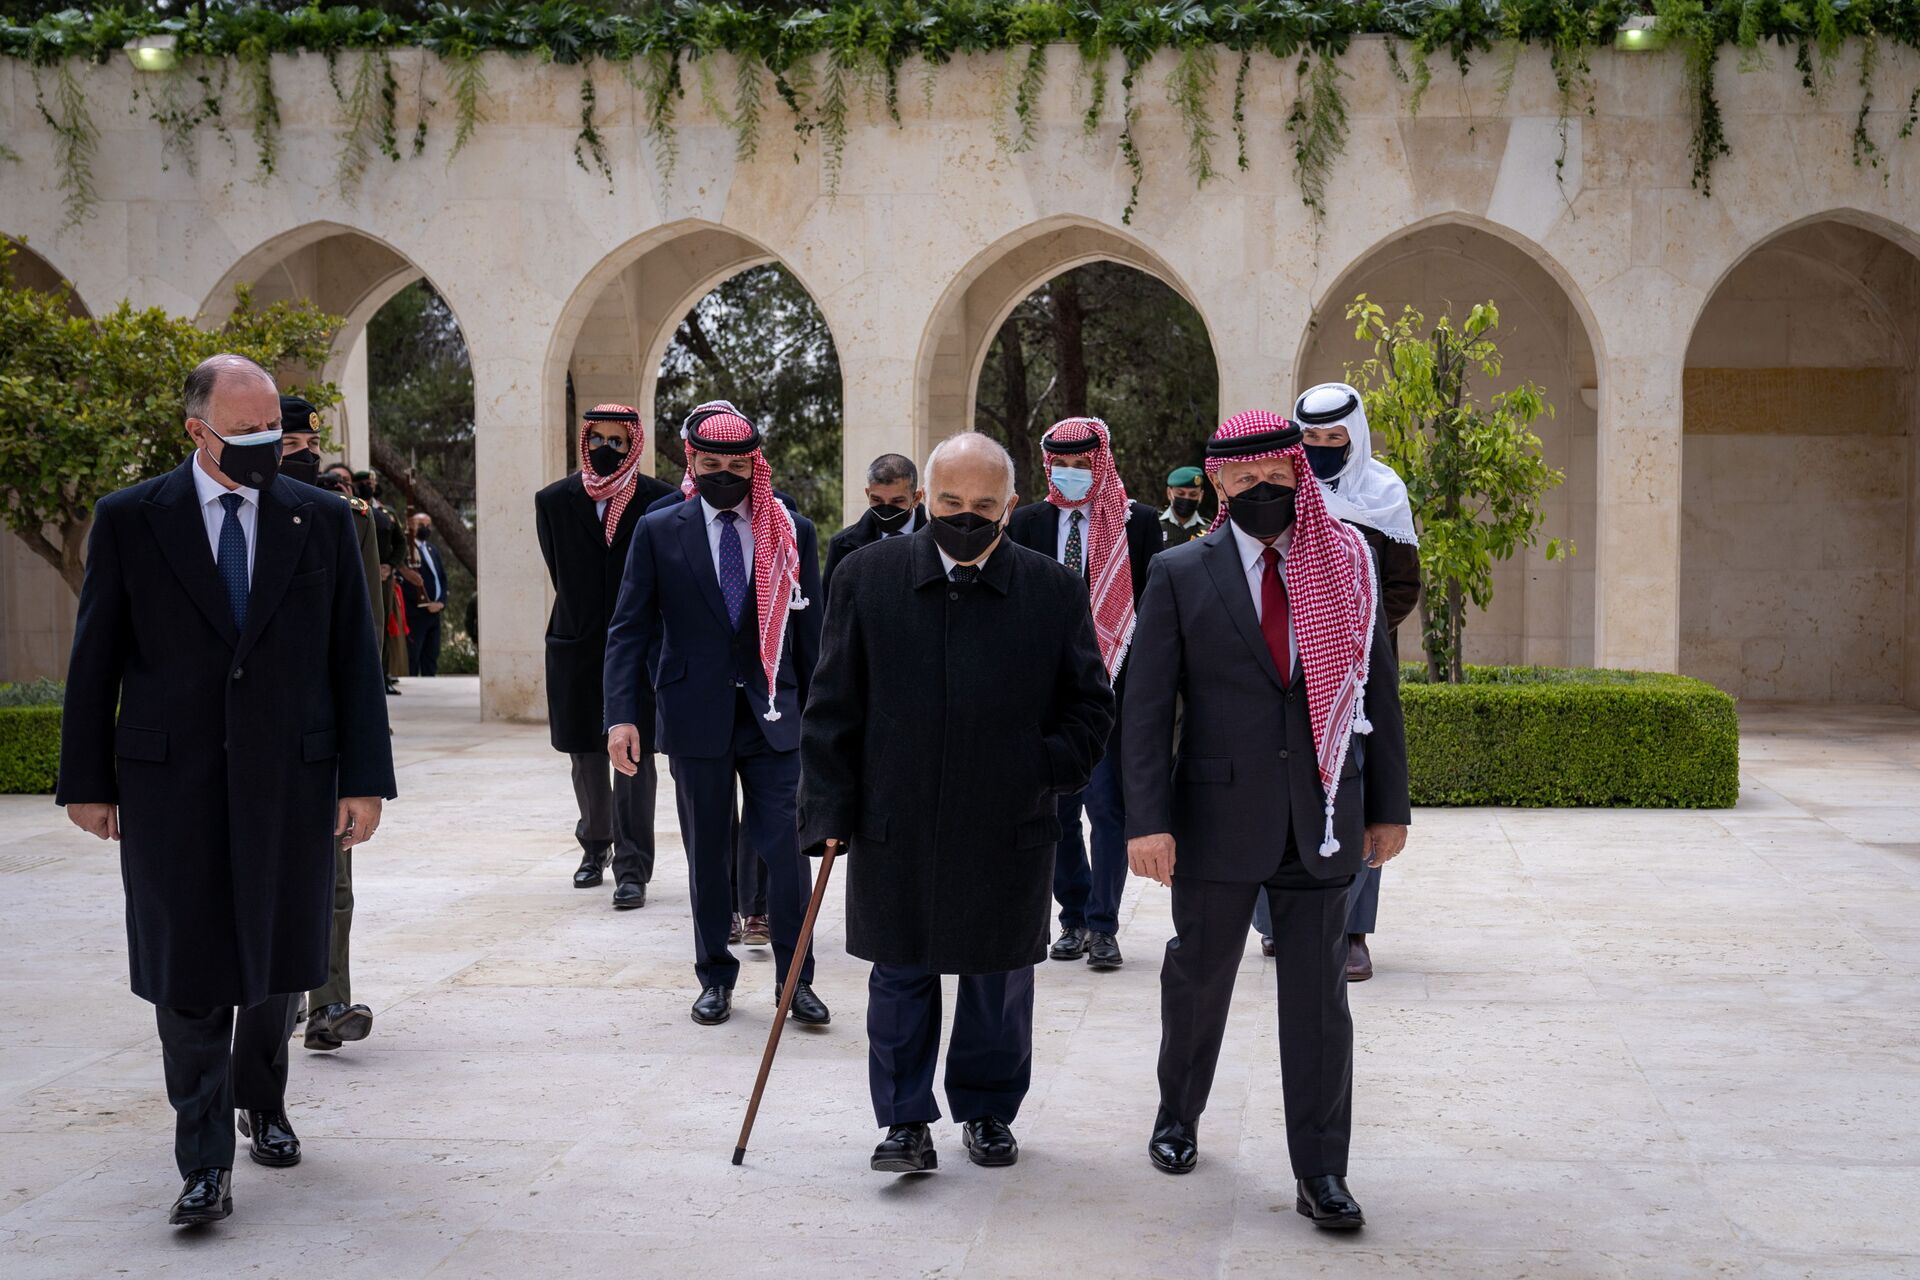 Jordan's King Abdullah II and members of the royal family including former crown prince and half-brother Prince Hamza arrive at the Raghdan Palace for a ceremony marking 100 years of independence, in Amman,  Jordan April 11, 2021. - Sputnik International, 1920, 07.09.2021